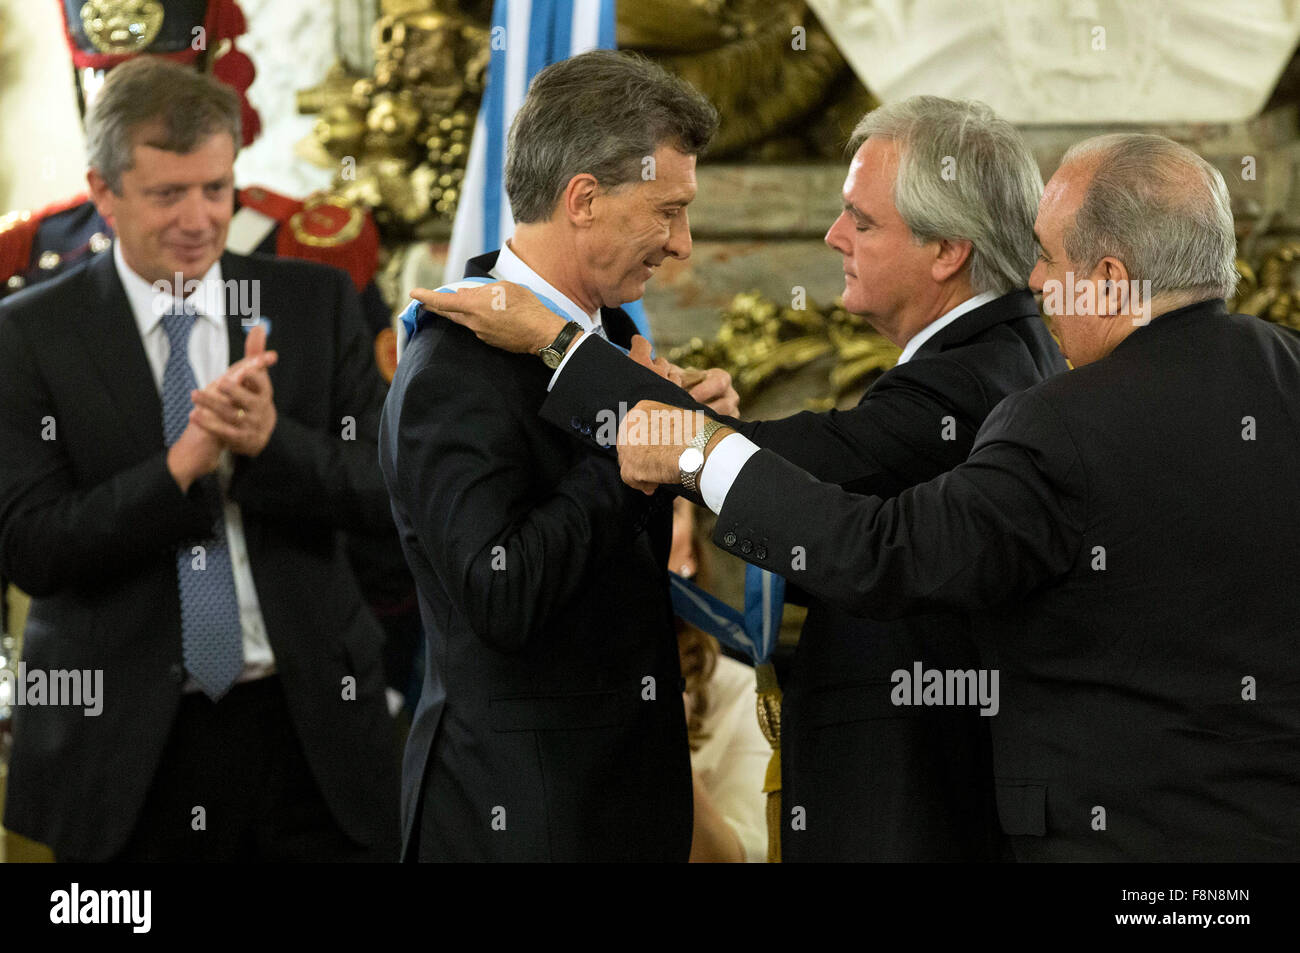 Buenos Aires, Argentina. 10th Dec, 2015. Argentina's new President Mauricio Macri (2nd L) receives the presidential sash from the provisional President of the Argentine Senate Federico Pinedo (2nd R) at White Room of Casa Rosada (Pink House) in Buenos Aires city, capital of Argentina, on Dec. 10, 2015. Mauricio Macri on Thursday inaugurated as new Argentine President, succeeding Cristina Fernandez. Credit:  Martin Zabala/Xinhua/Alamy Live News Stock Photo